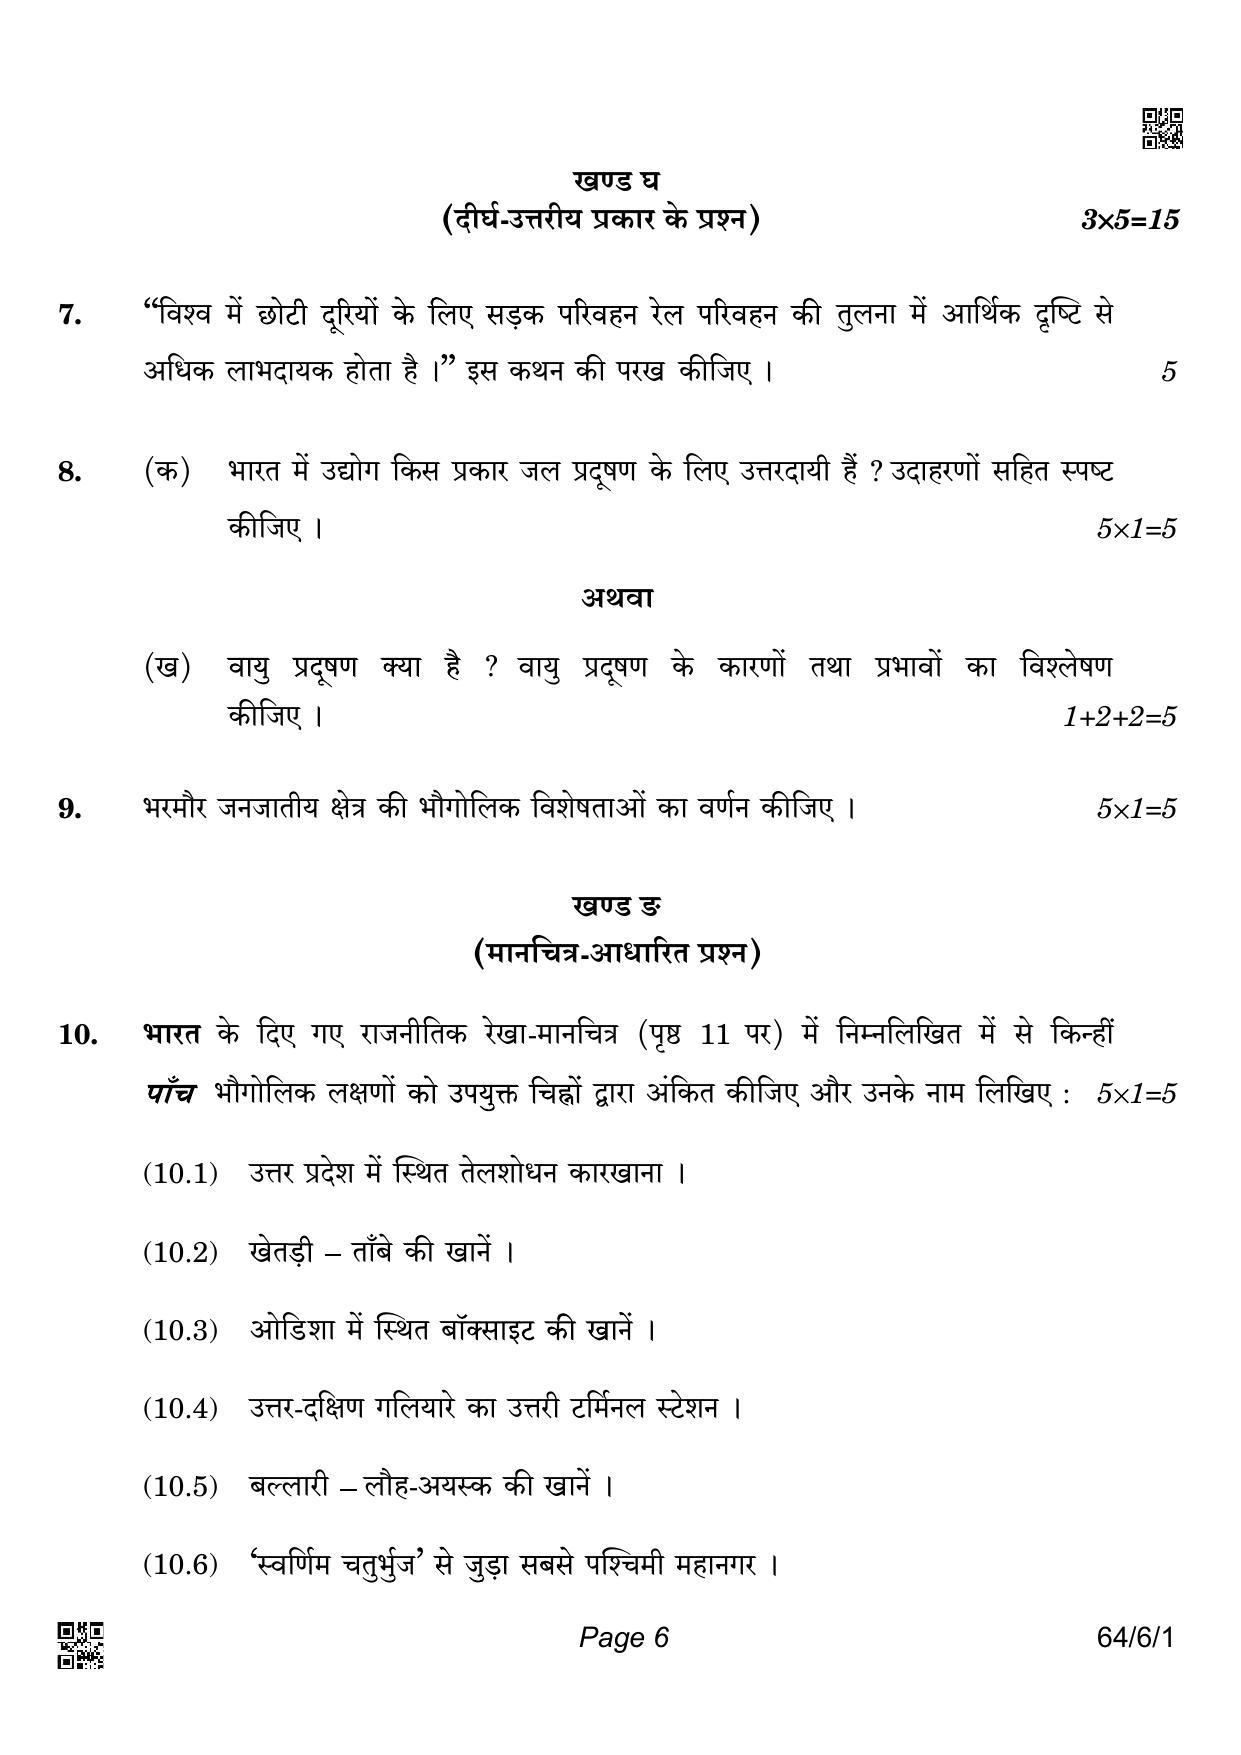 CBSE Class 12 64-6-1 GEOGRAPHY 2022 Compartment Question Paper - Page 6